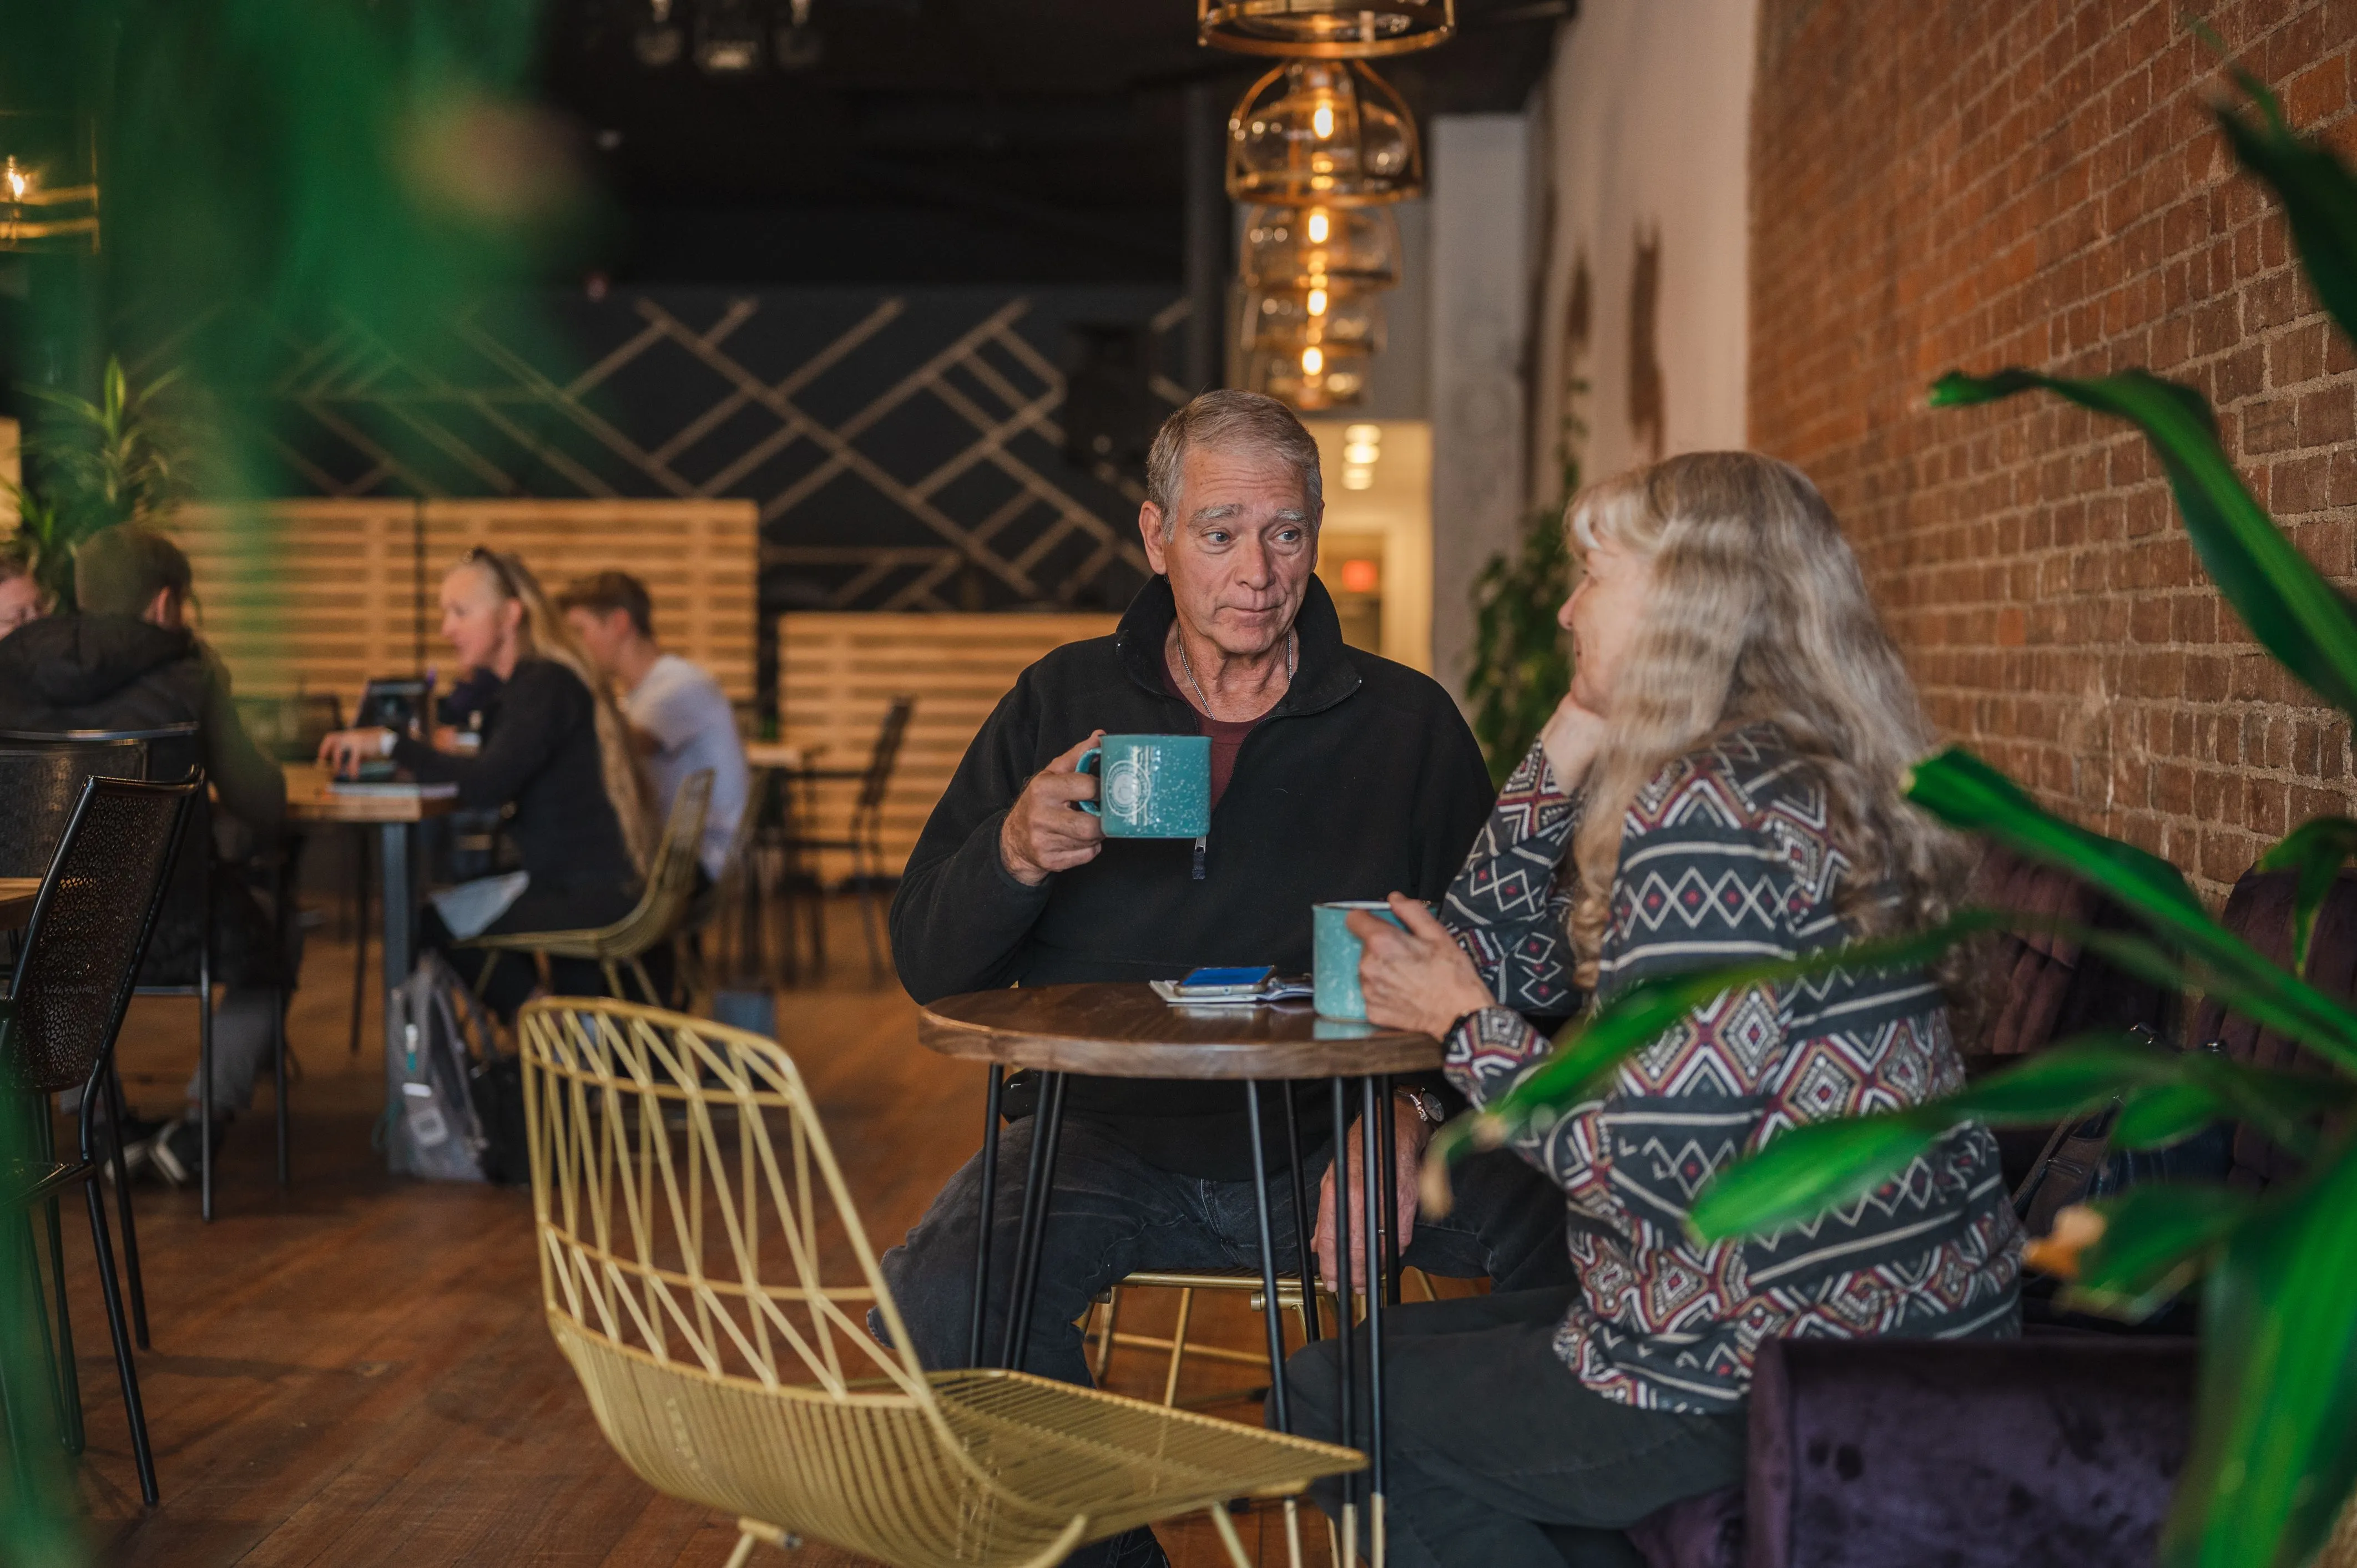 Two people, a man and a woman, having a conversation over coffee in a cozy cafe with other patrons and brick walls in the background.